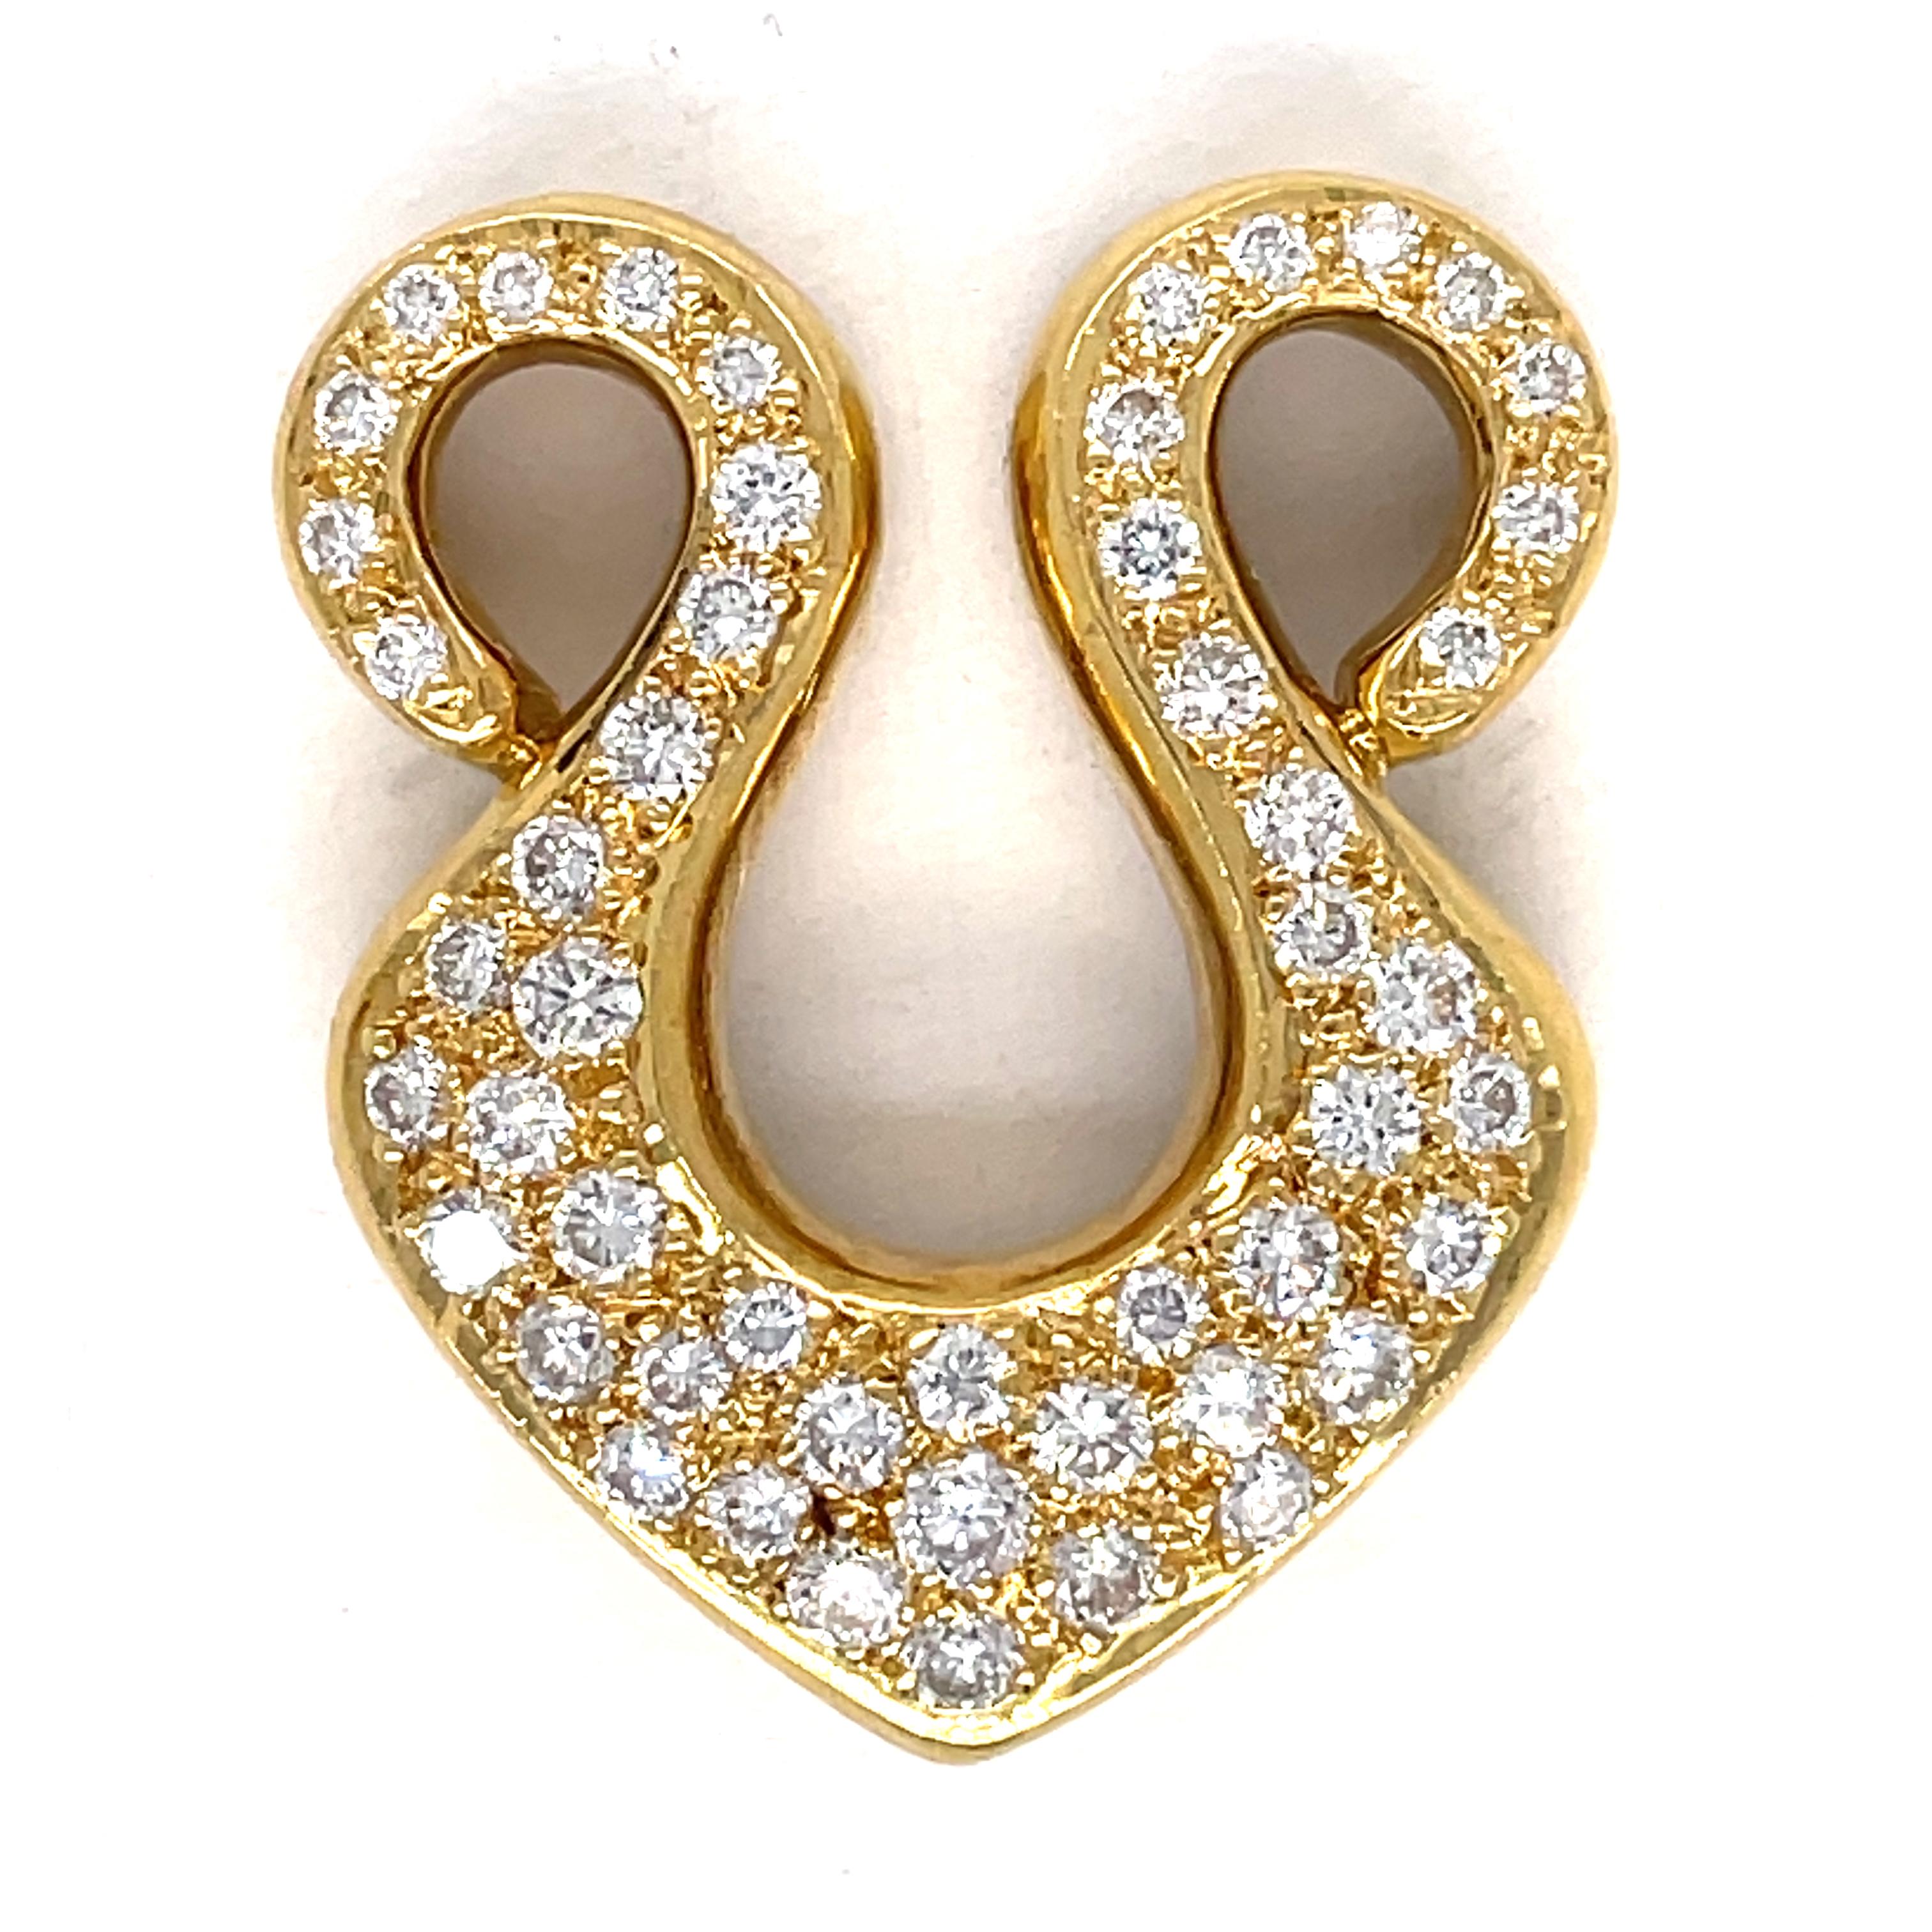 Jewelry Material: Yellow Gold 18k (the gold has been tested by a professional)
Total Carat Weight: 0.85ct (Approx.)
Total Metal Weight:6.39 g
Size:24.11 x 20.37 mm
Grading Results:
Stone Type:  Diamond 
Shape: Round
Carat:0.85 ct (Approx.), Stones